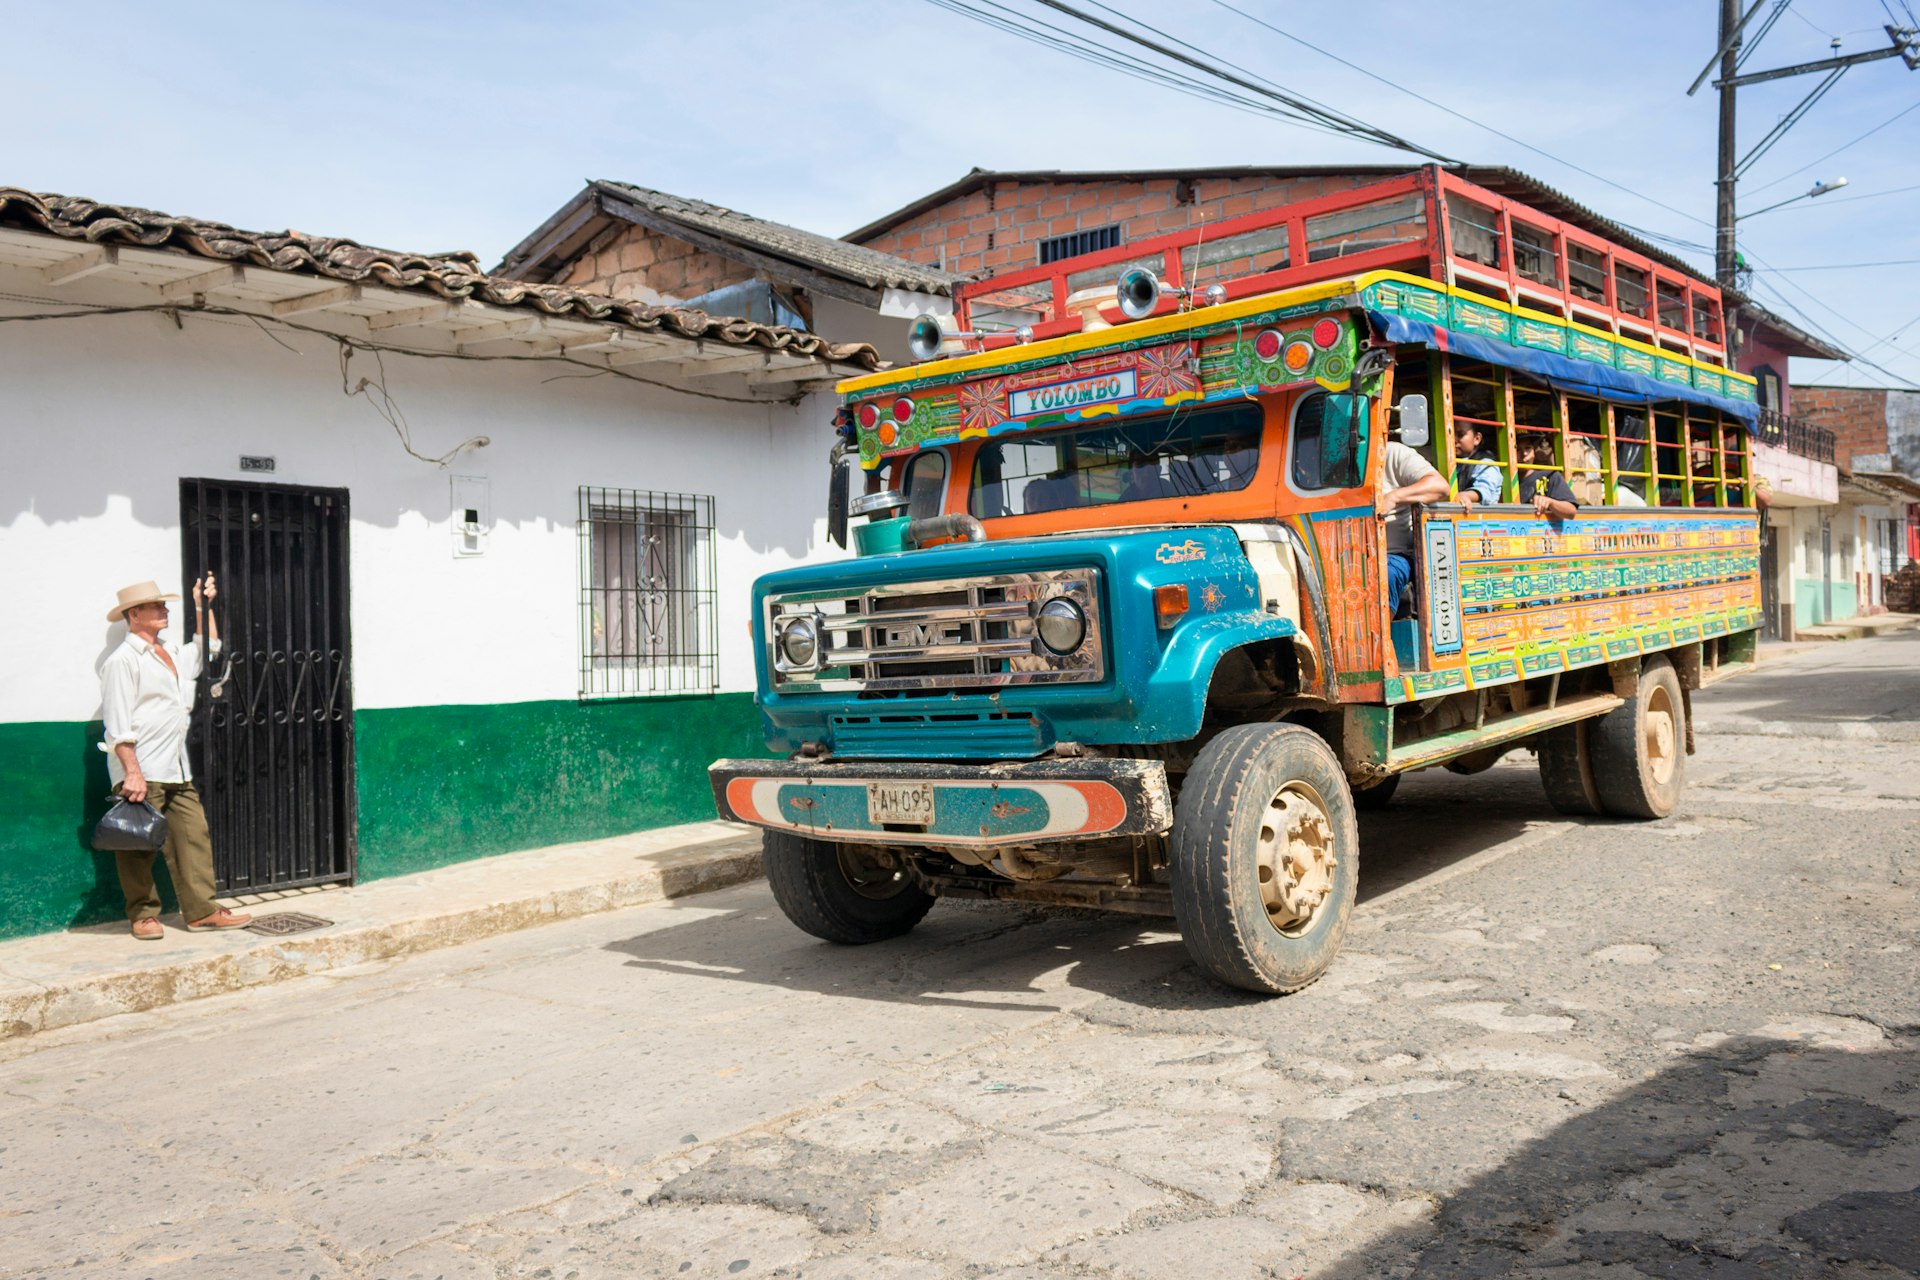 A colorful chiva bus pulls into a street in Yolombó, Antioquia, Colombia